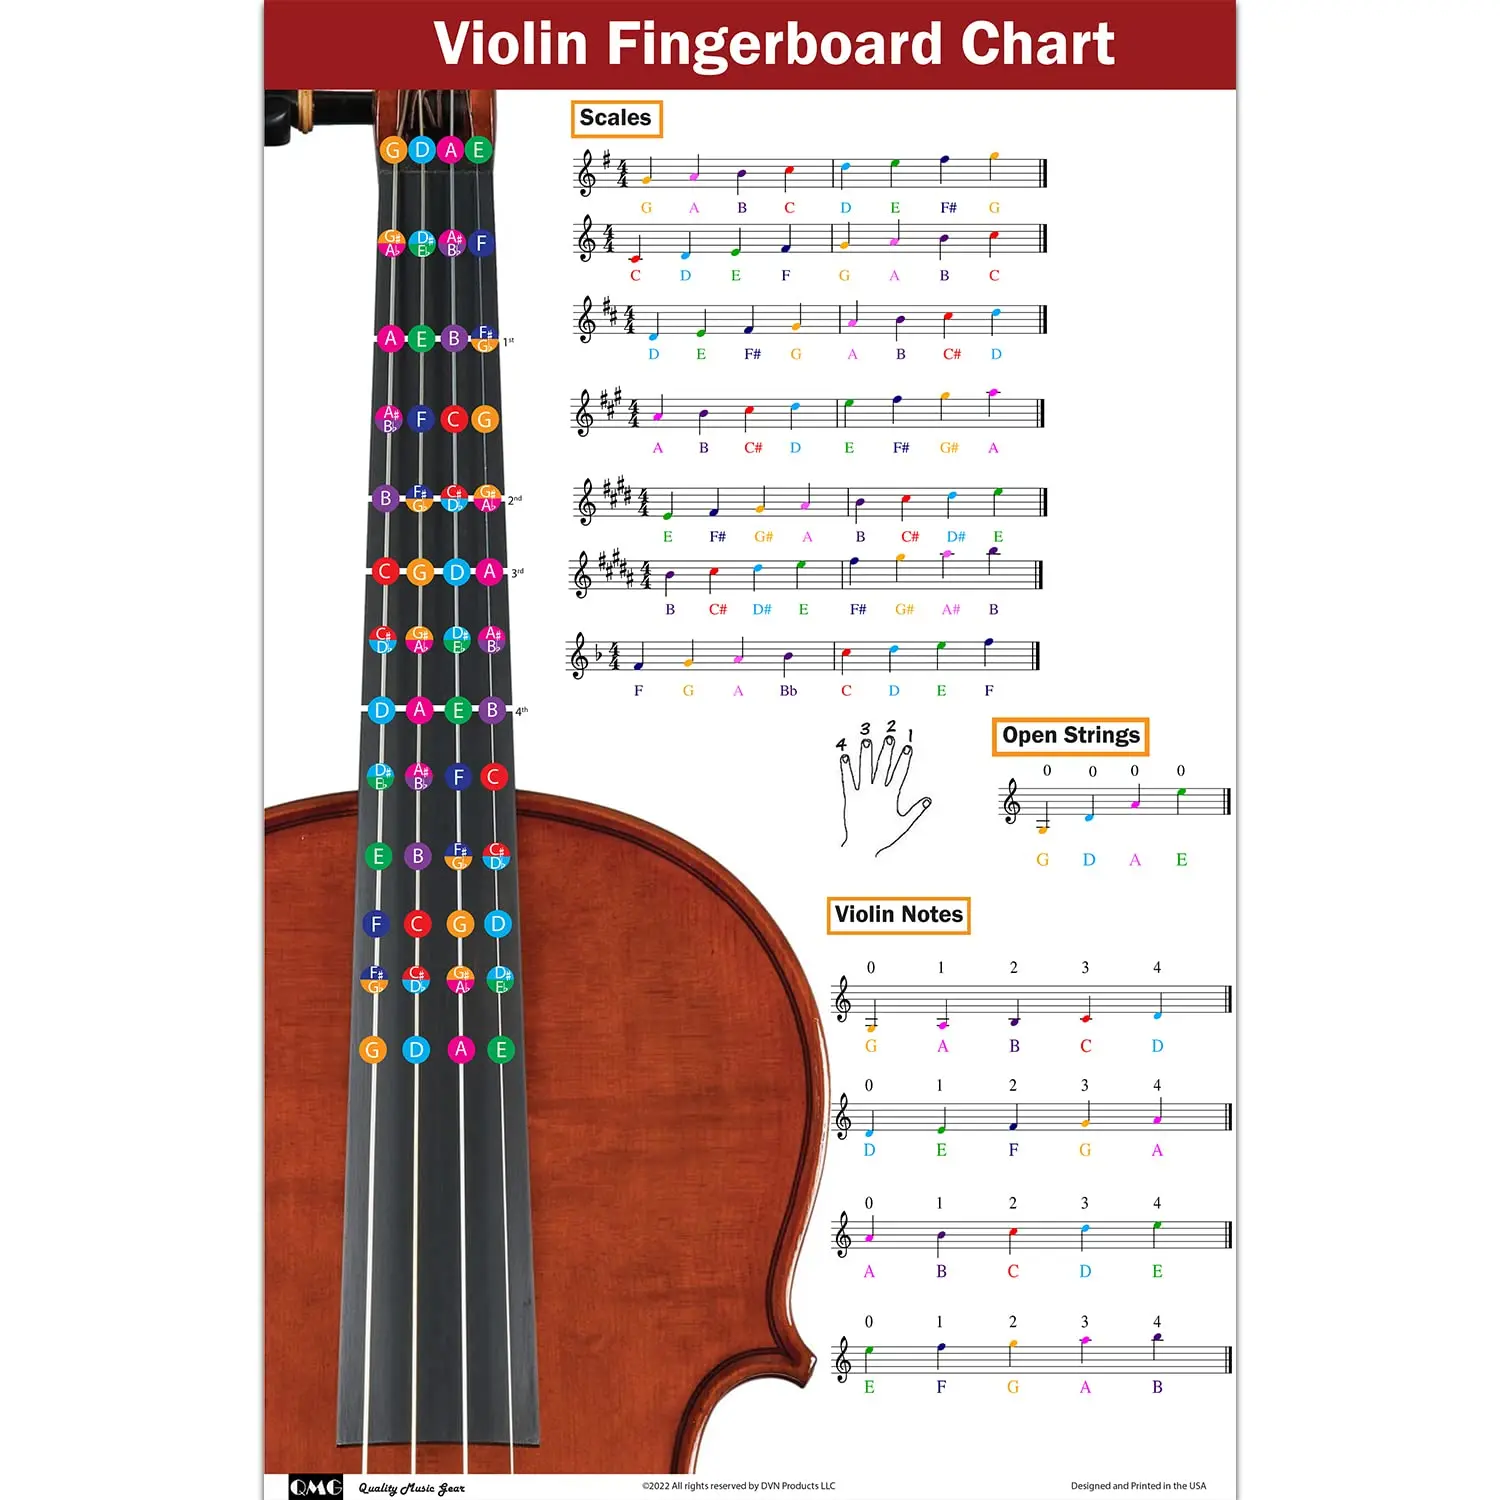 notes on violin fingerboard - Which fingers play which notes on violin